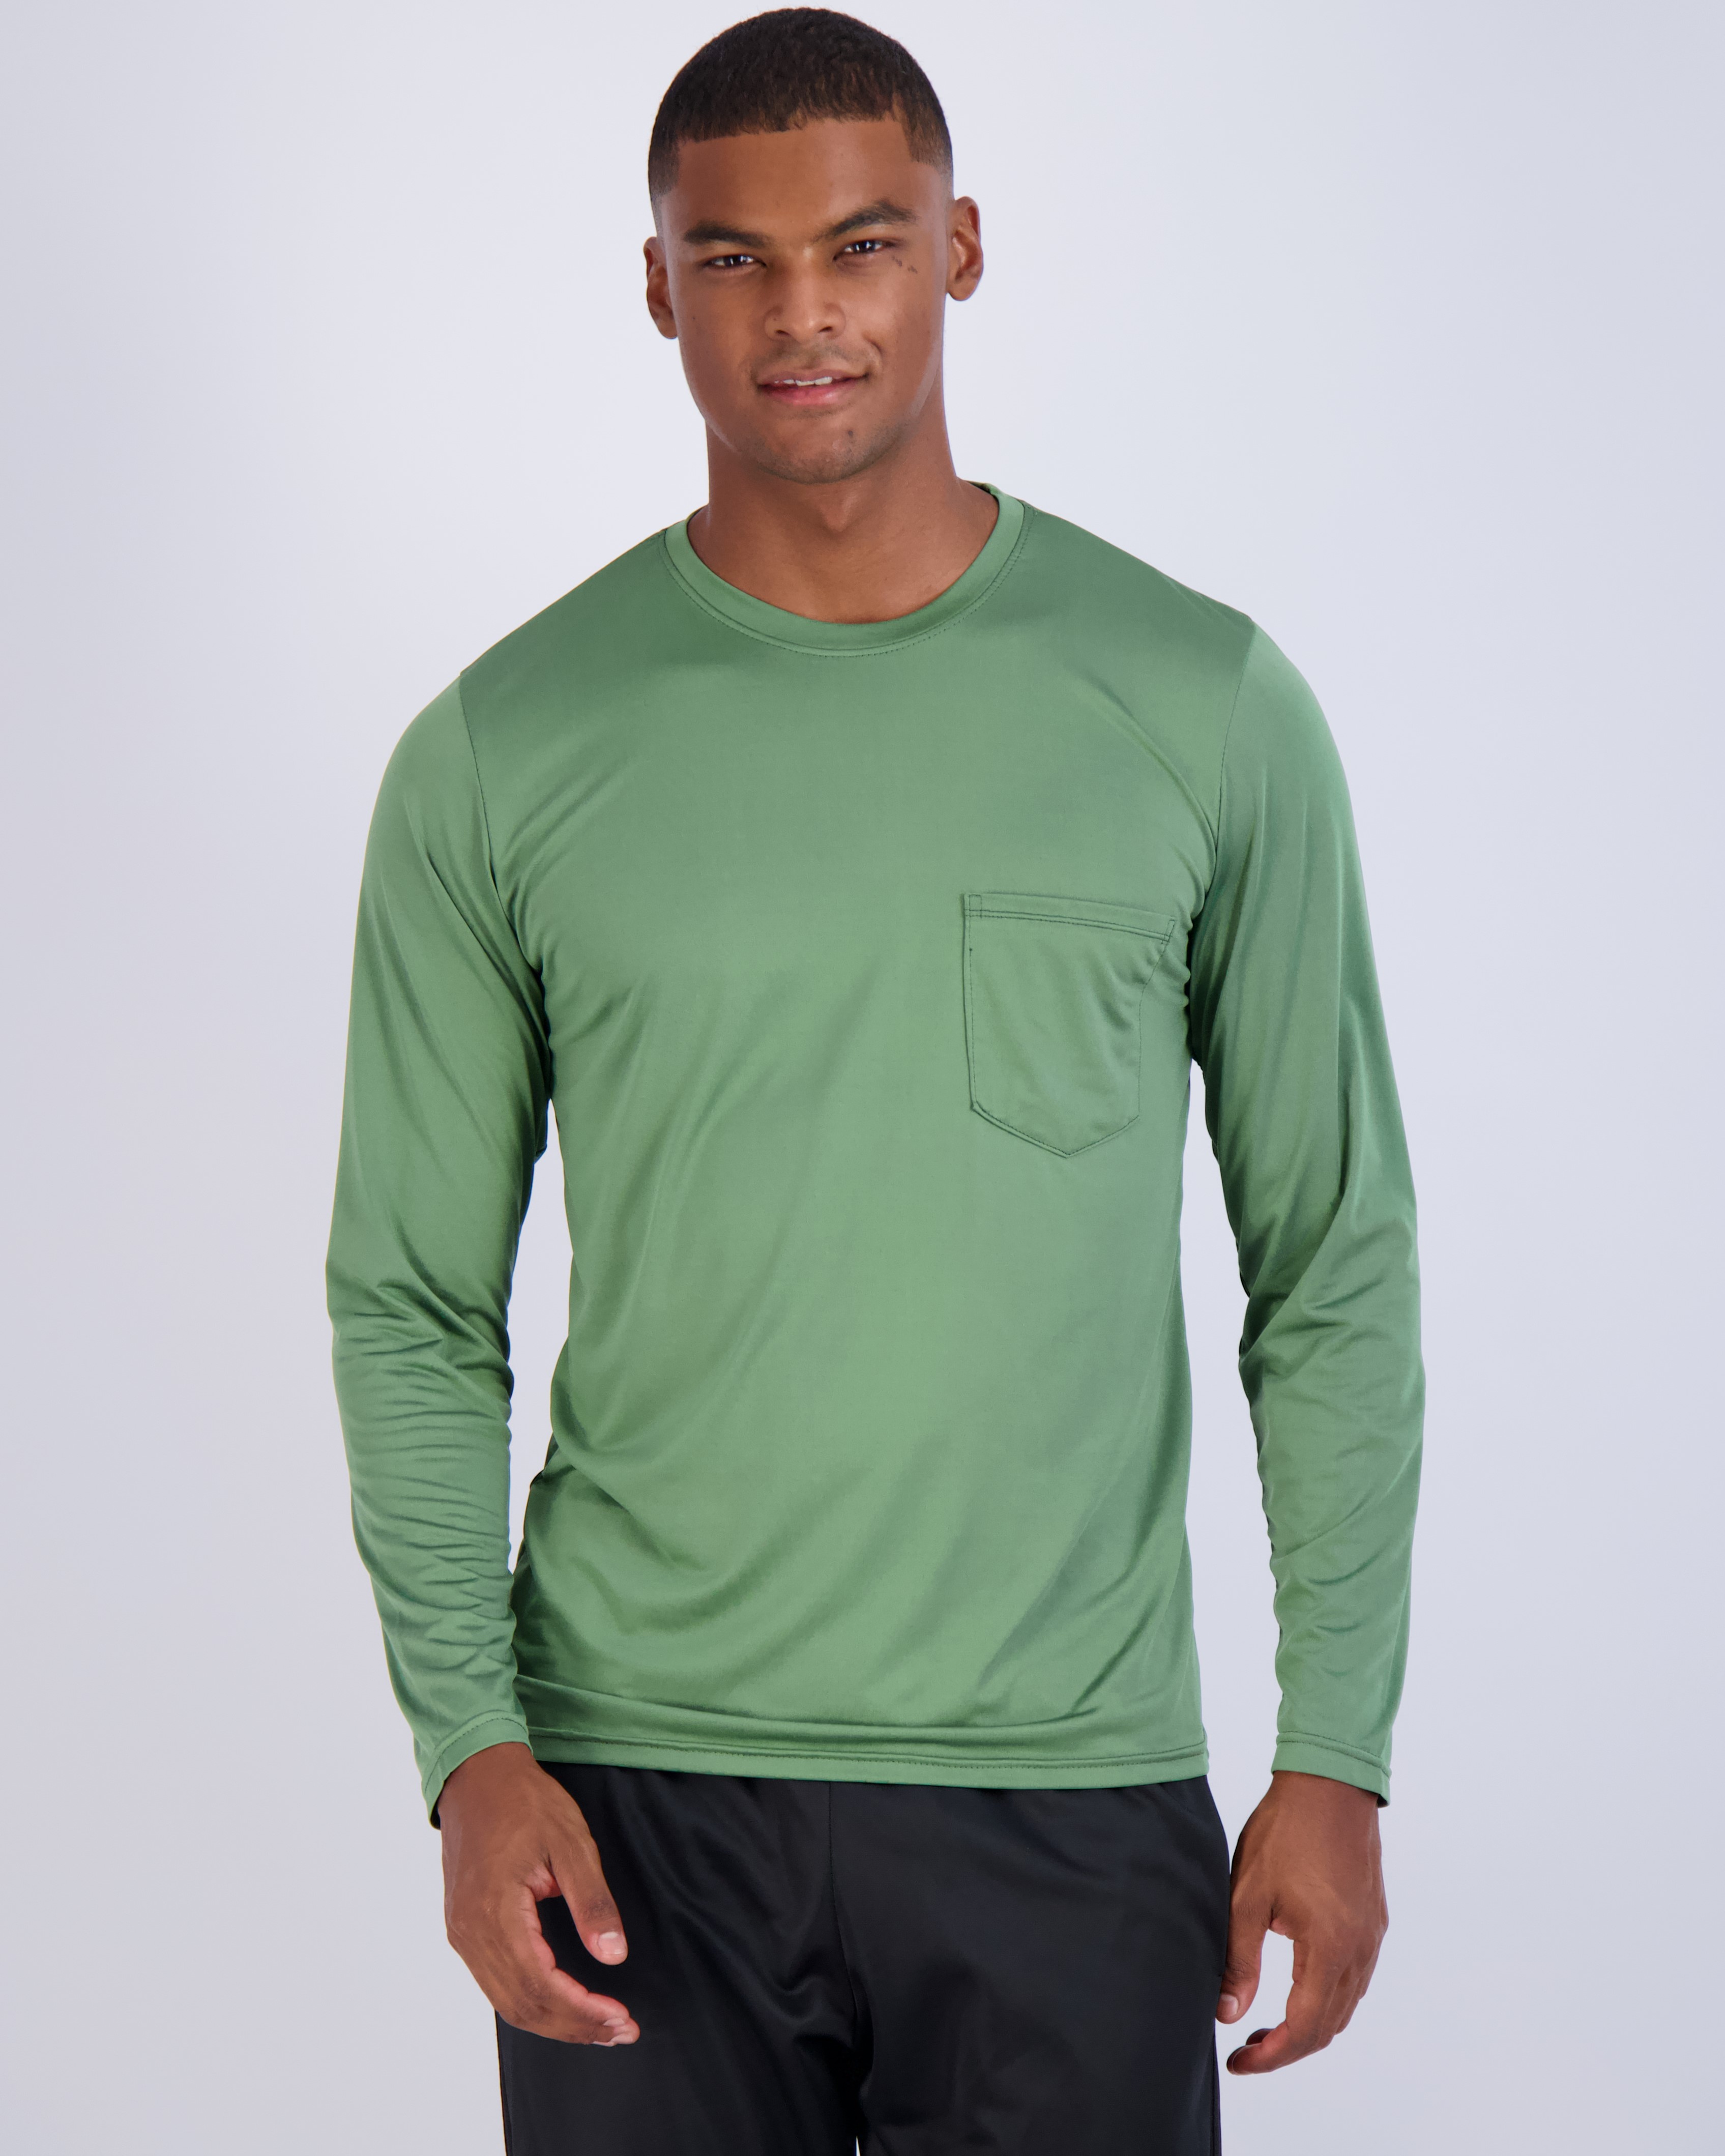 Real Essentials 4 Pack: Men's Dry-Fit Active Athletic Long Sleeve ...